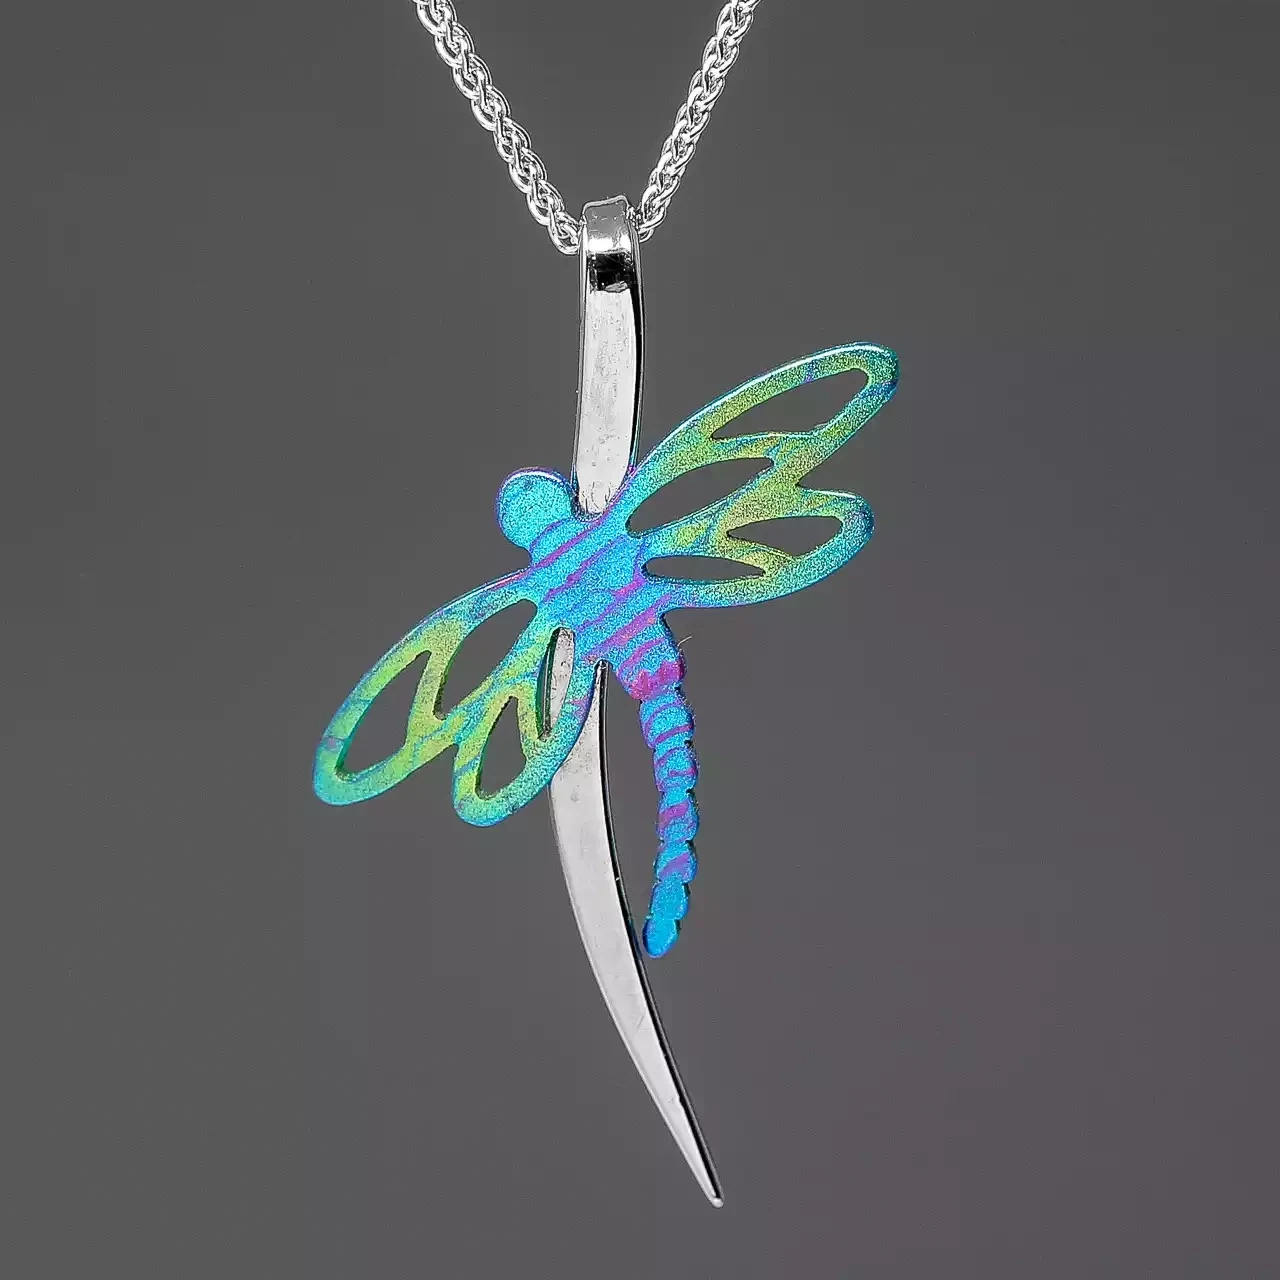 Titanium Dragonfly Pendant - Large With Stem by Prism Design